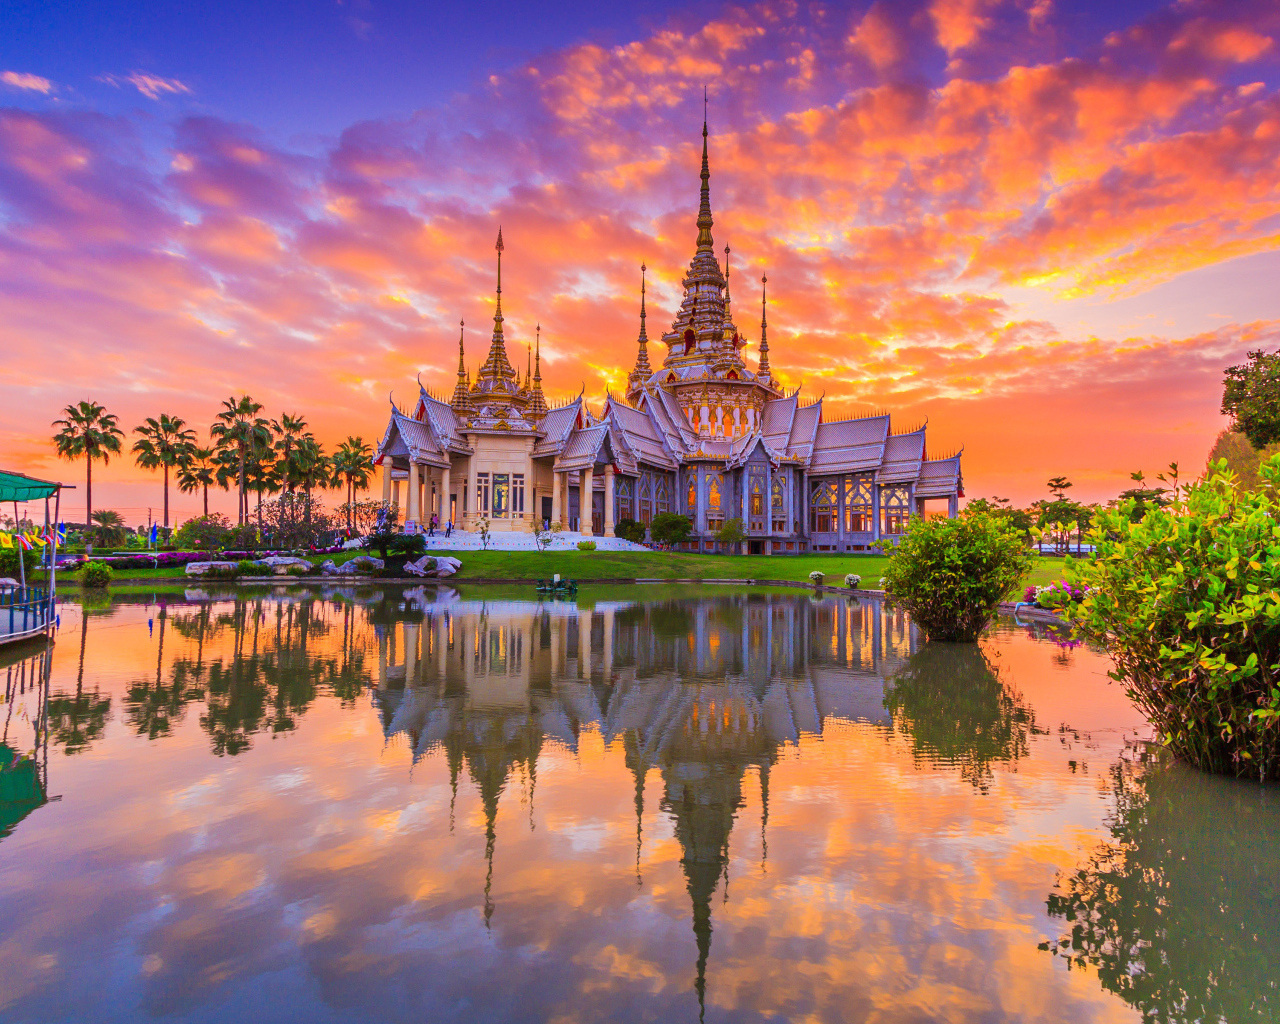 Beautiful temple under the picturesque sky at sunset, Thailand